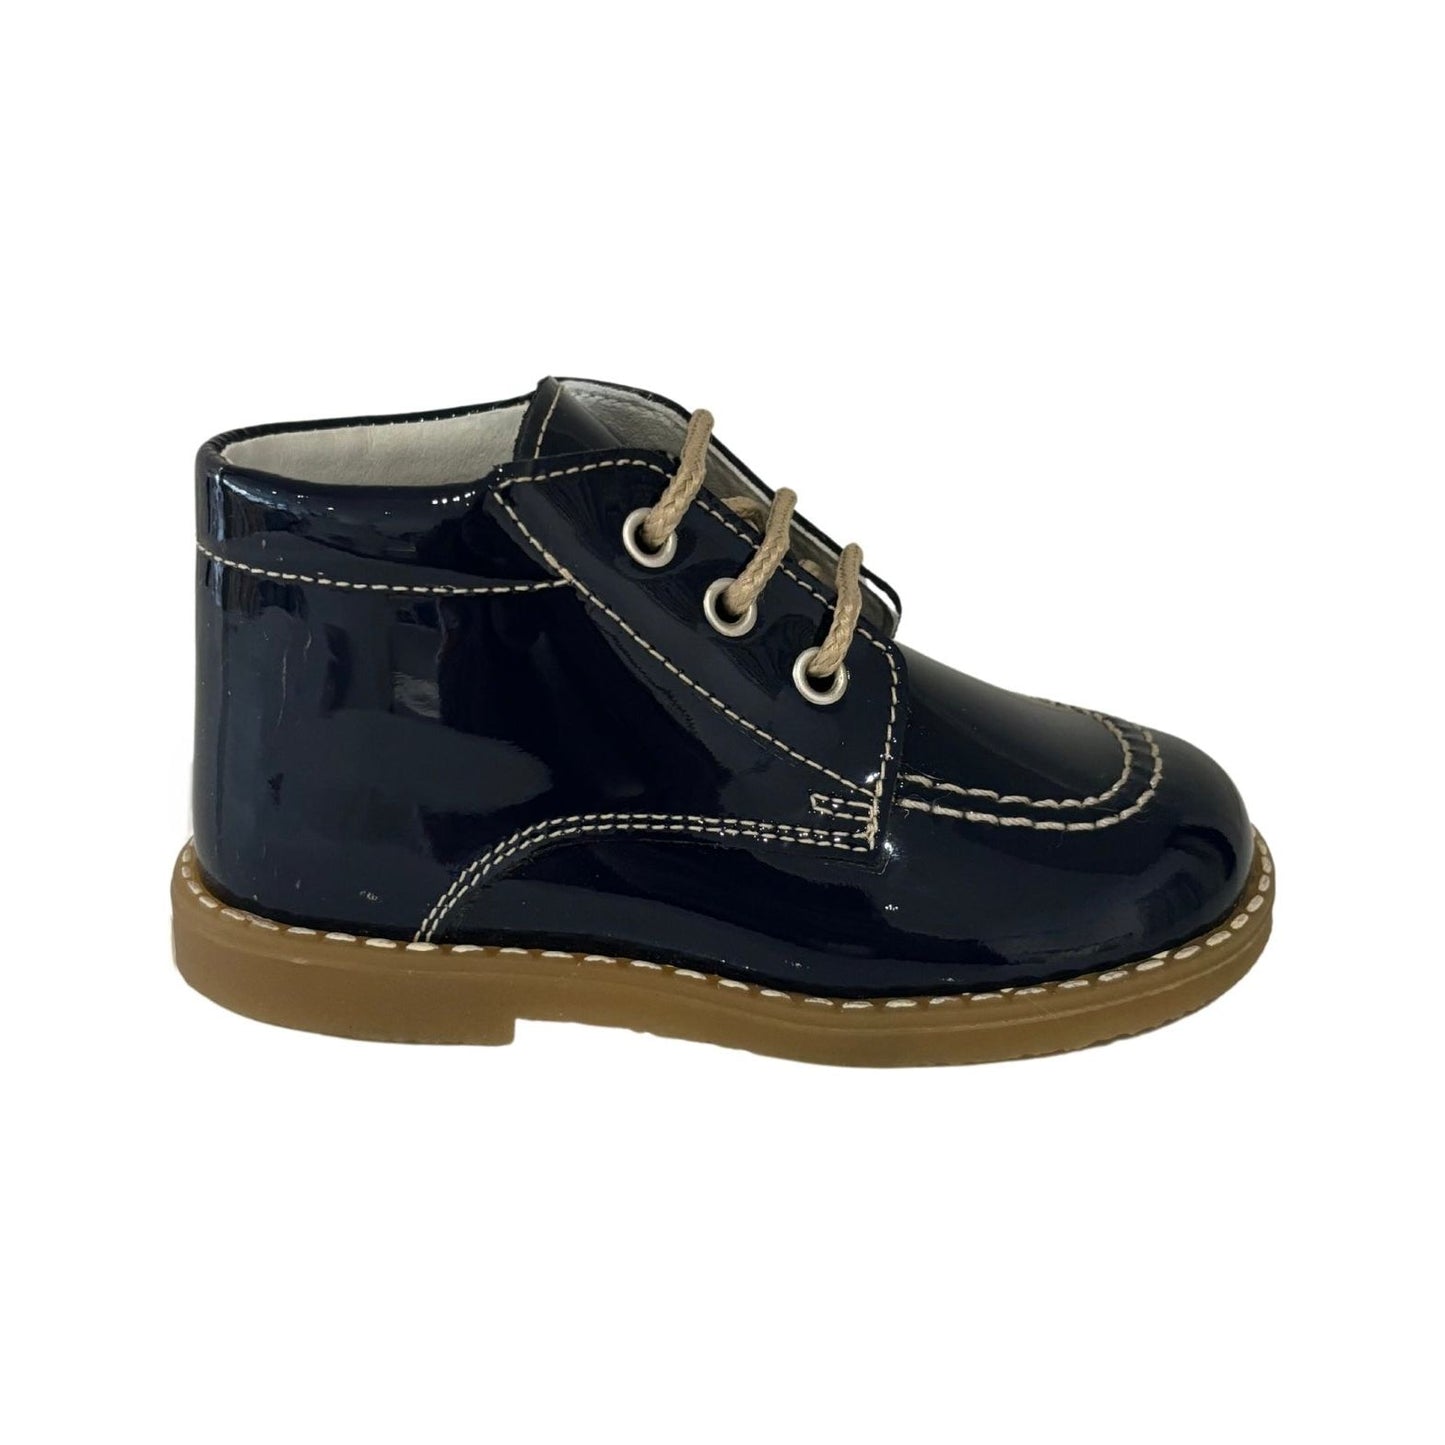 Navy blue boots for boys by Andanines